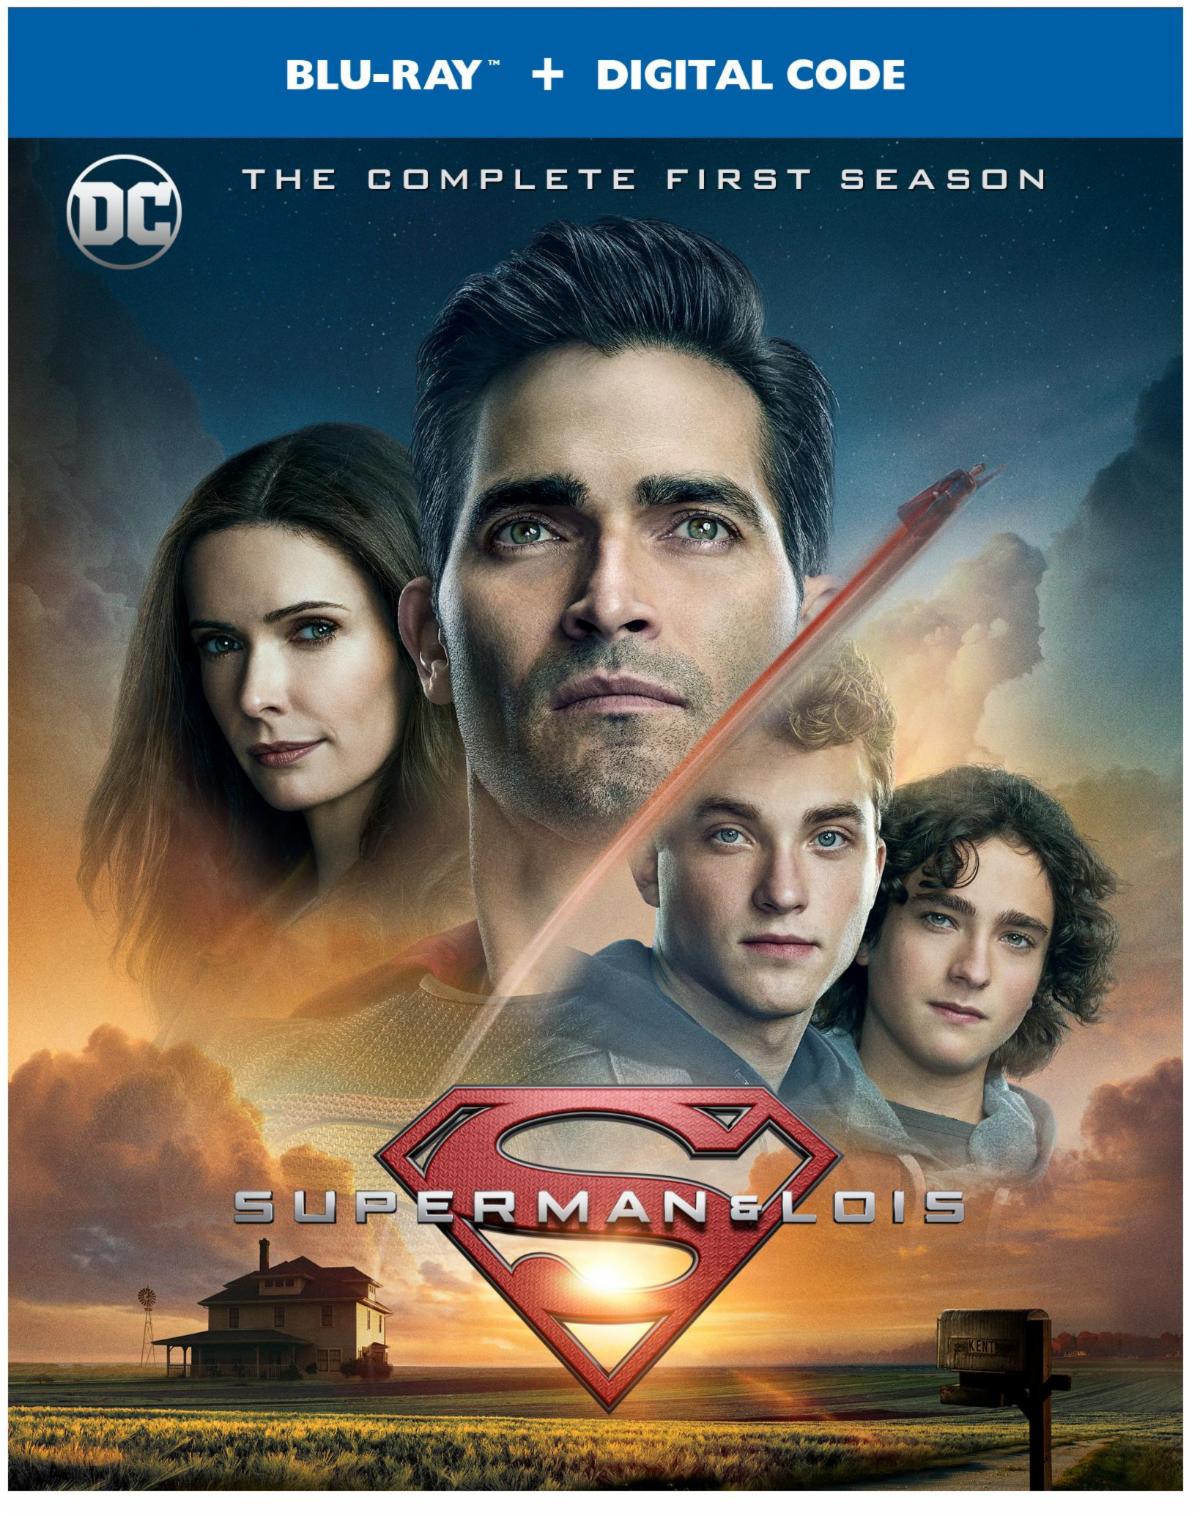 Superman & lois: the complete first season on dvd